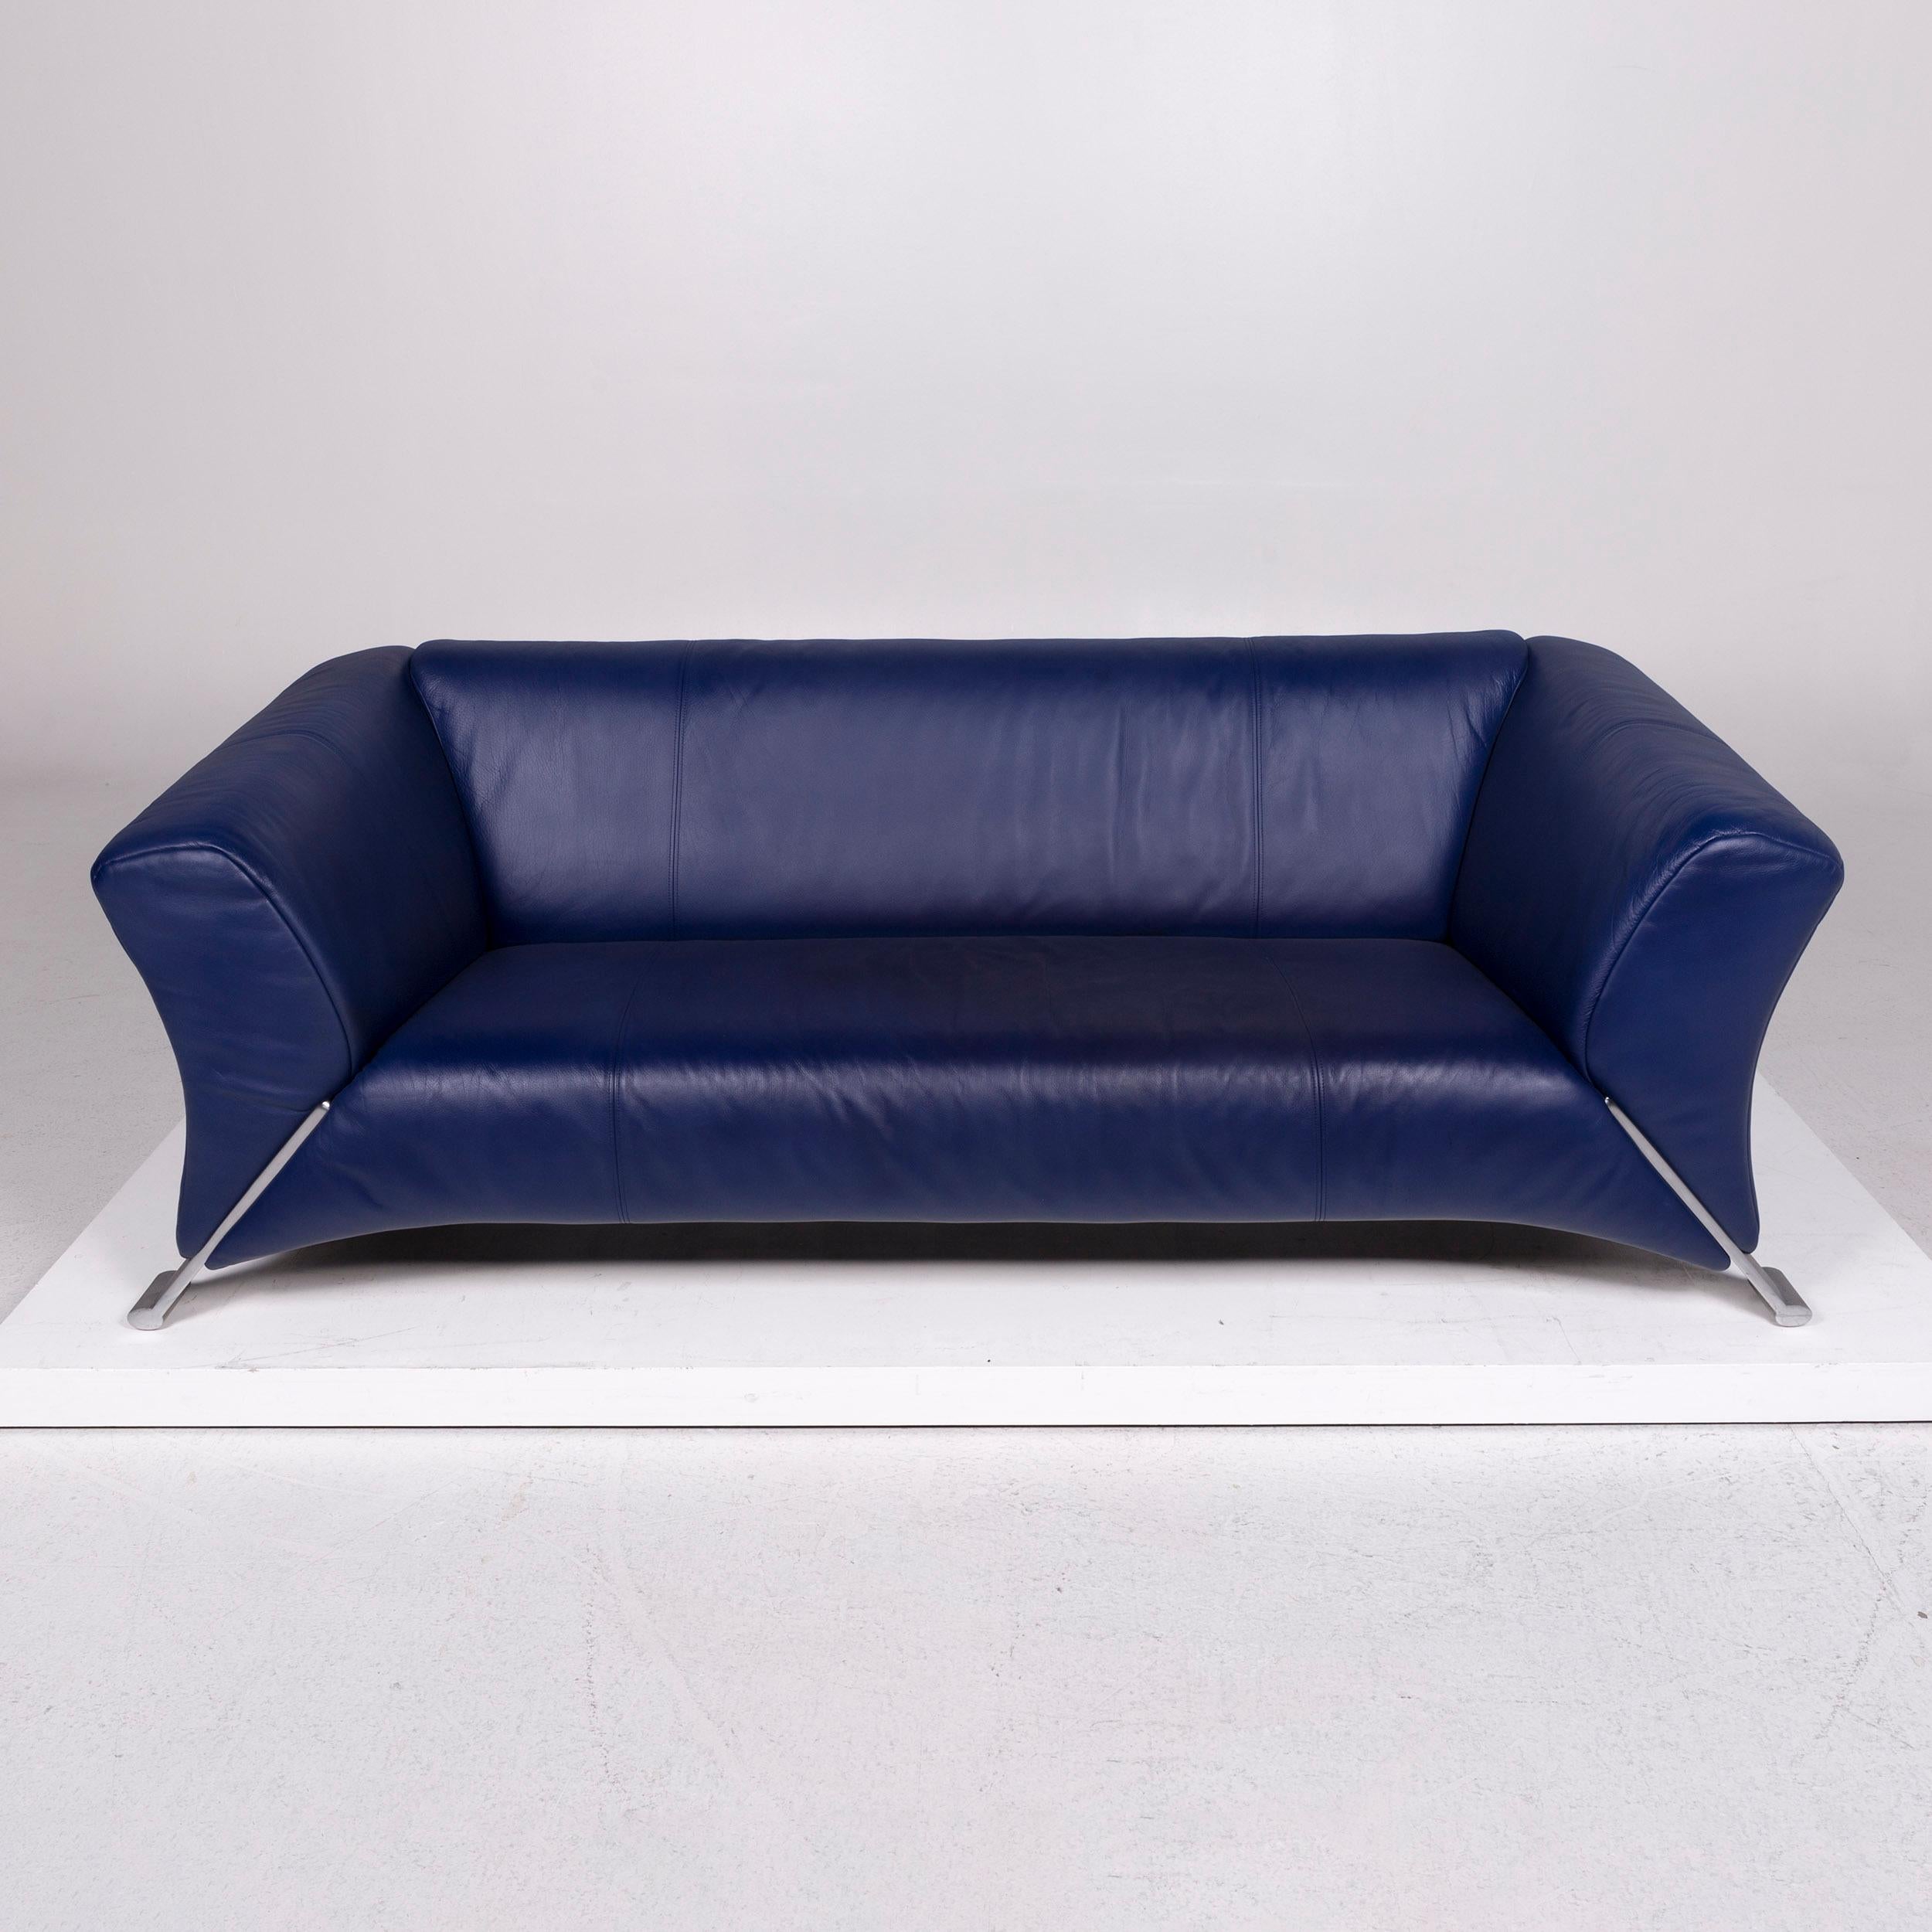 Rolf Benz 322 Leather Sofa Blue Three-Seat Couch In Good Condition For Sale In Cologne, DE